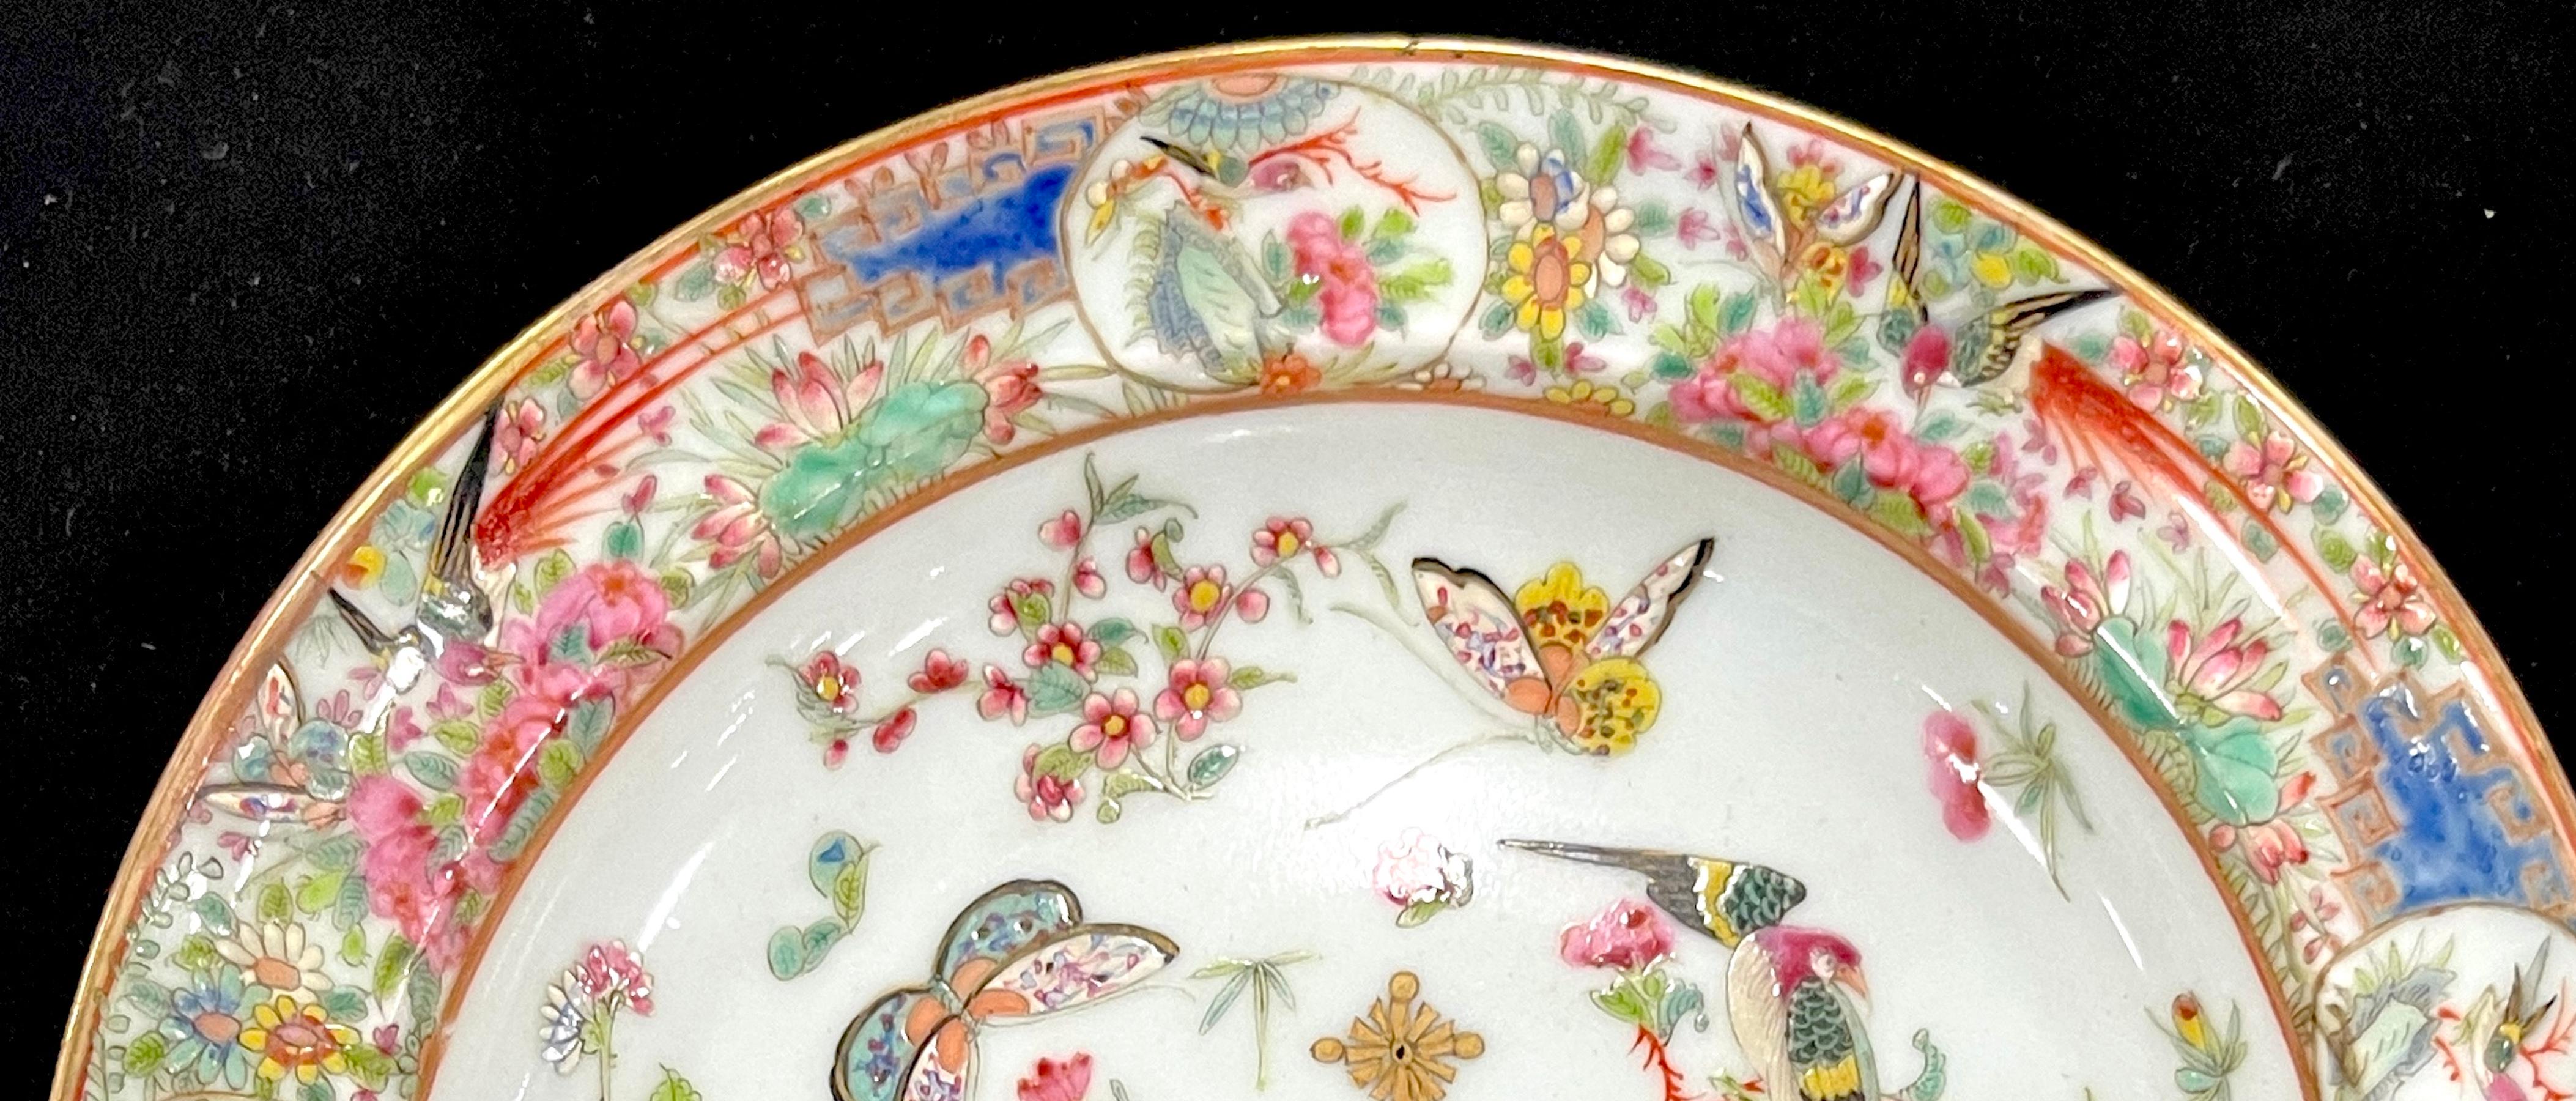 Porcelain Chinese Export Armorial Soup Plate from Marquis De Almendares Service, 1842 For Sale